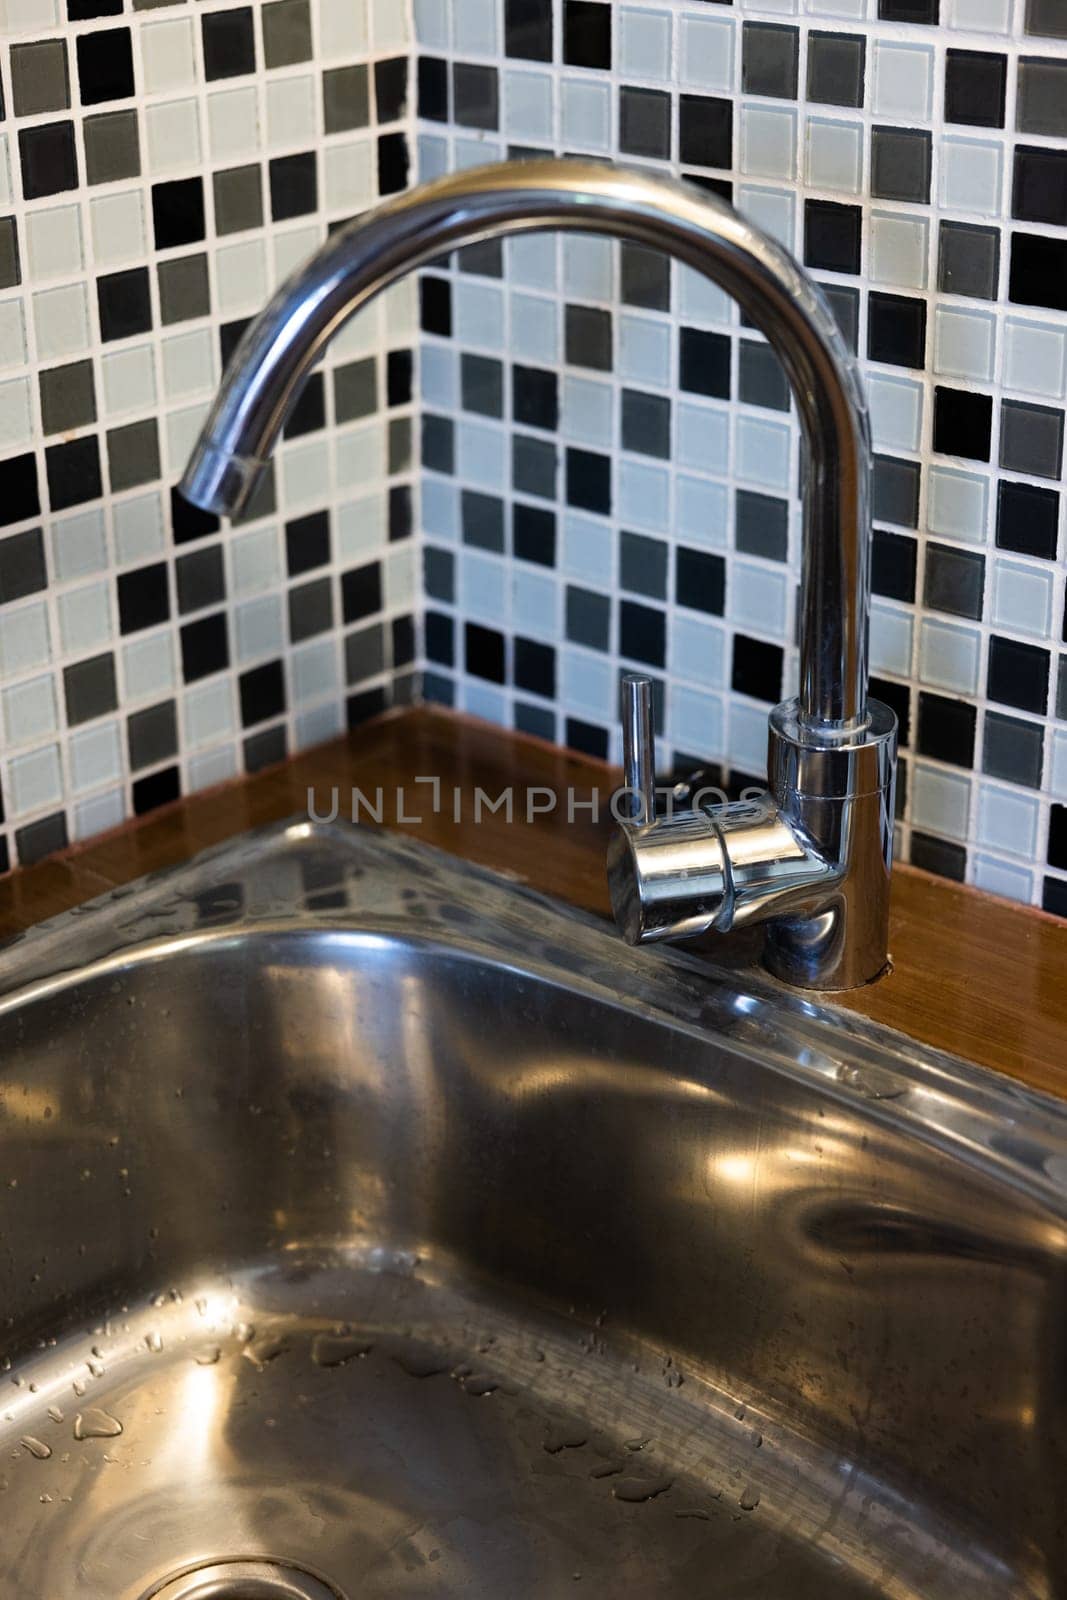 Clean sink with pouring water in the kitchen, metal faucet and sink in an old home interior. by SHOTPRIME